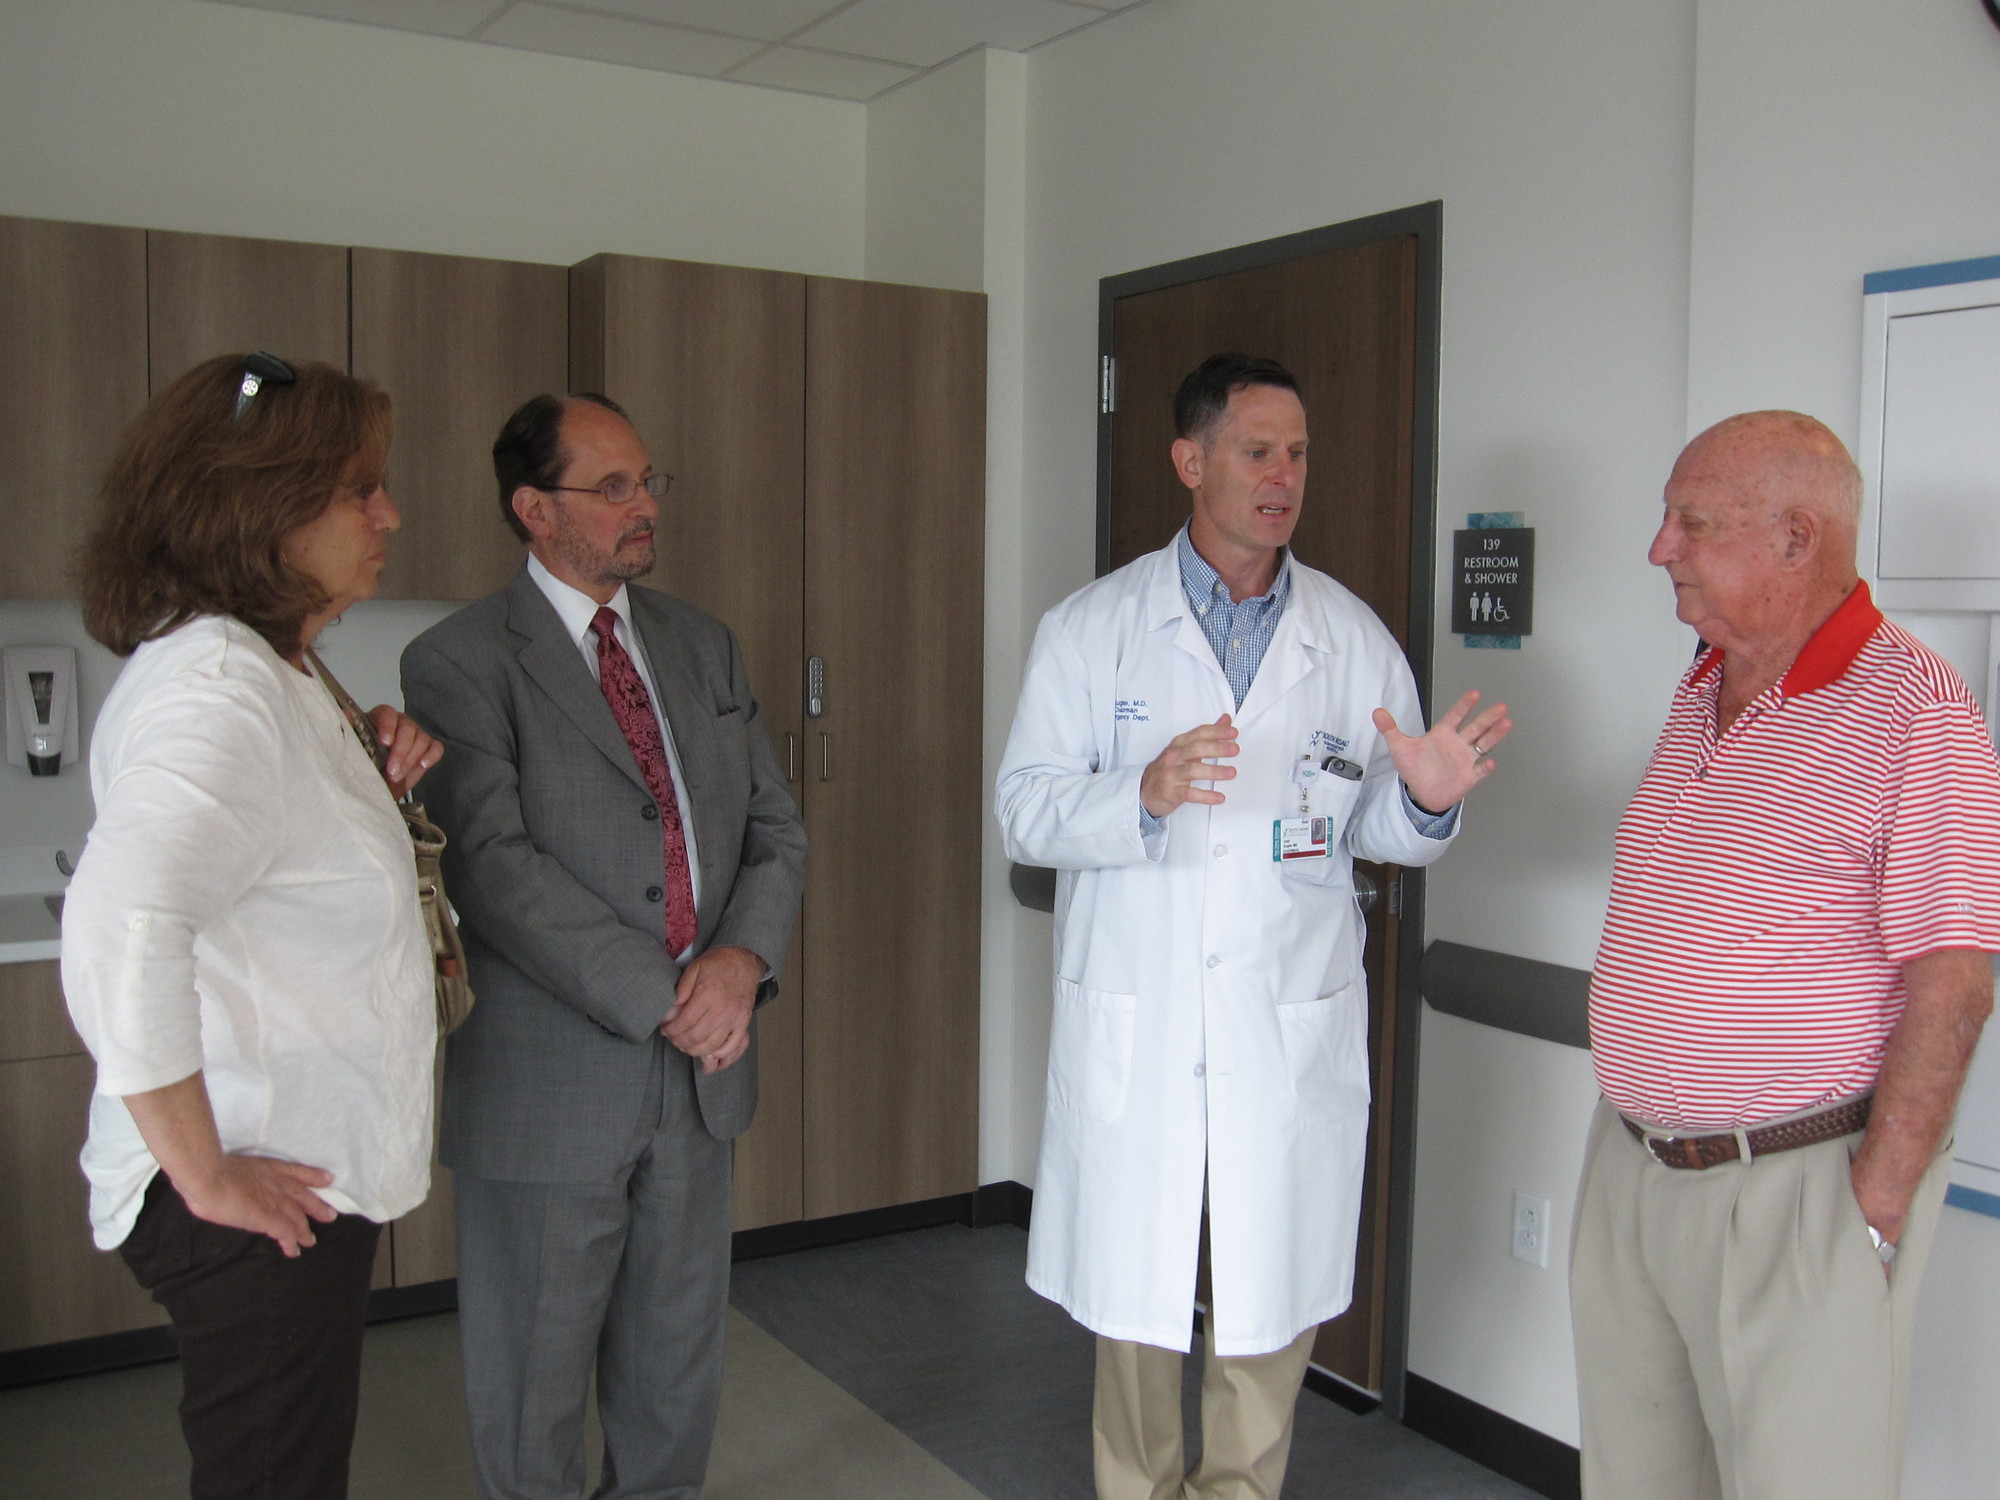 Chamber of Commerce Executive Director Janet Cohen, far left; President Mark Tannenbaum; Dr. Joshua Kugler, South Nassau’s director of emergency services; and Stanley Fleischman, the chamber’s chairman emeritus, toured South Nassau’s new emergency department on July 6.